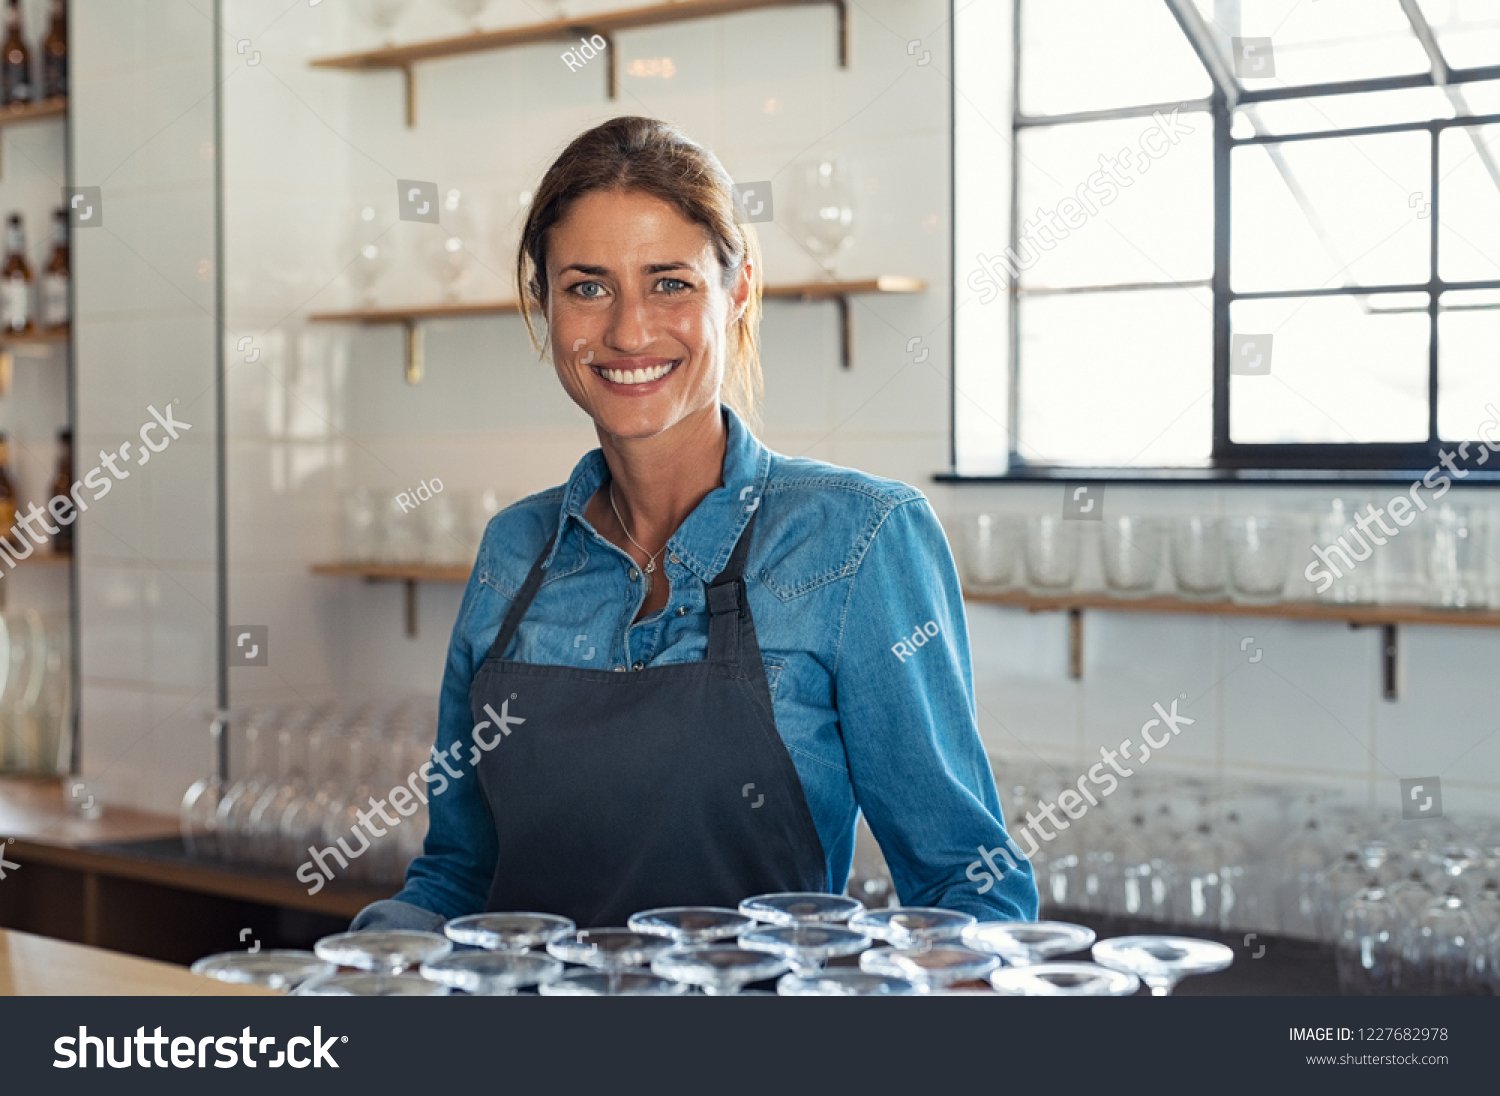 Smiling proud bartender woman standing behind counter and looking at camera. Portrait of beautiful weitress wearing denim shirt with apron. Successful small business owner at pub or coffee shop. #1227682978